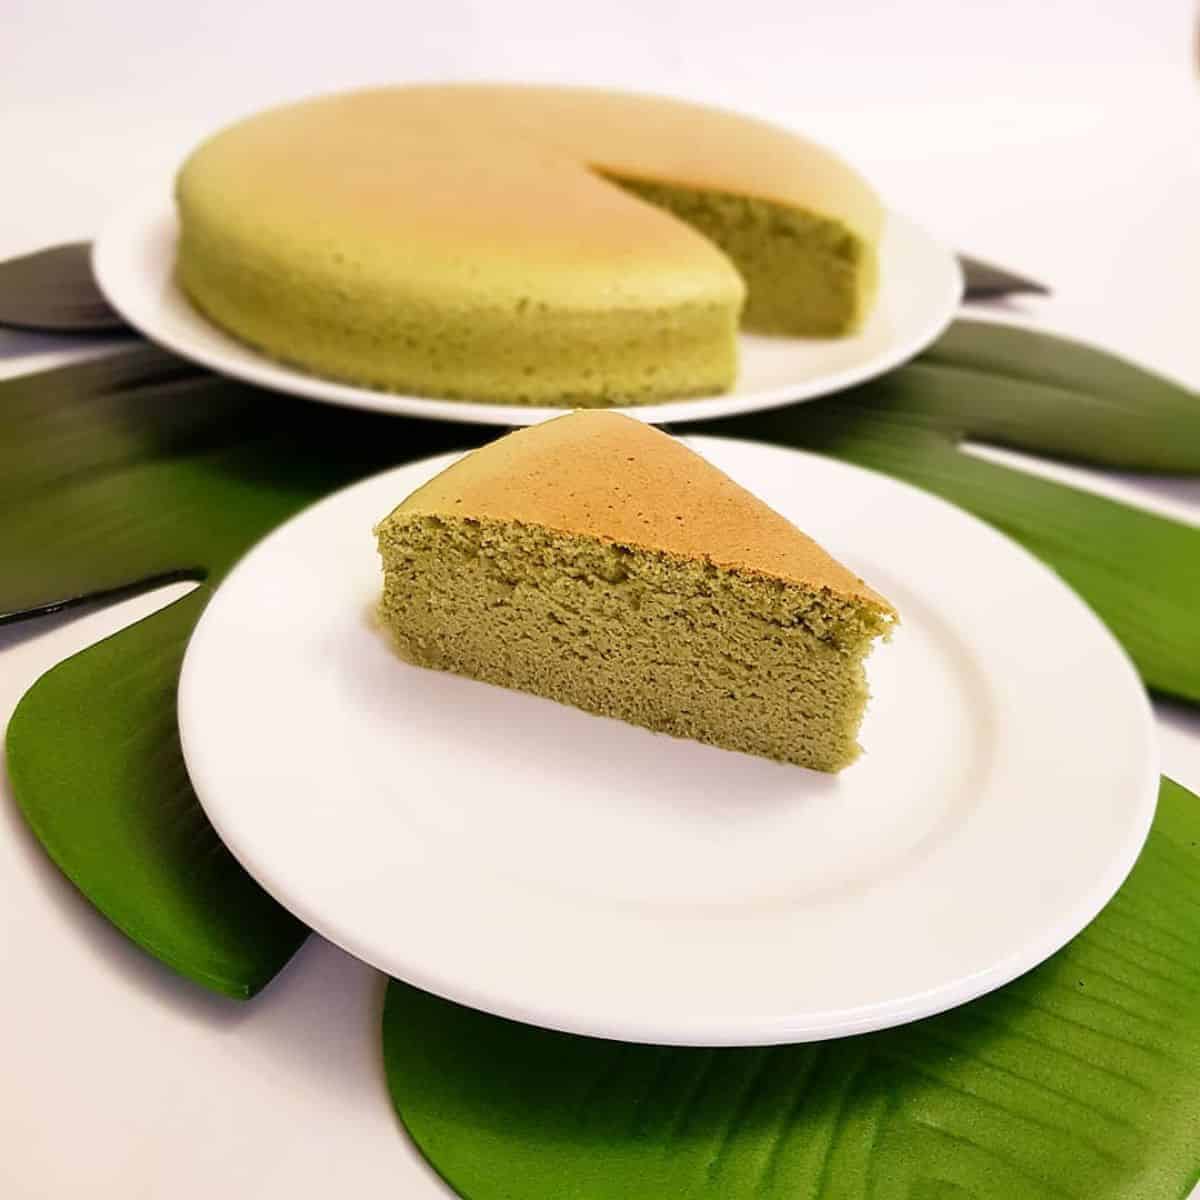 Round Matcha Sponge Cake with leaf placemat